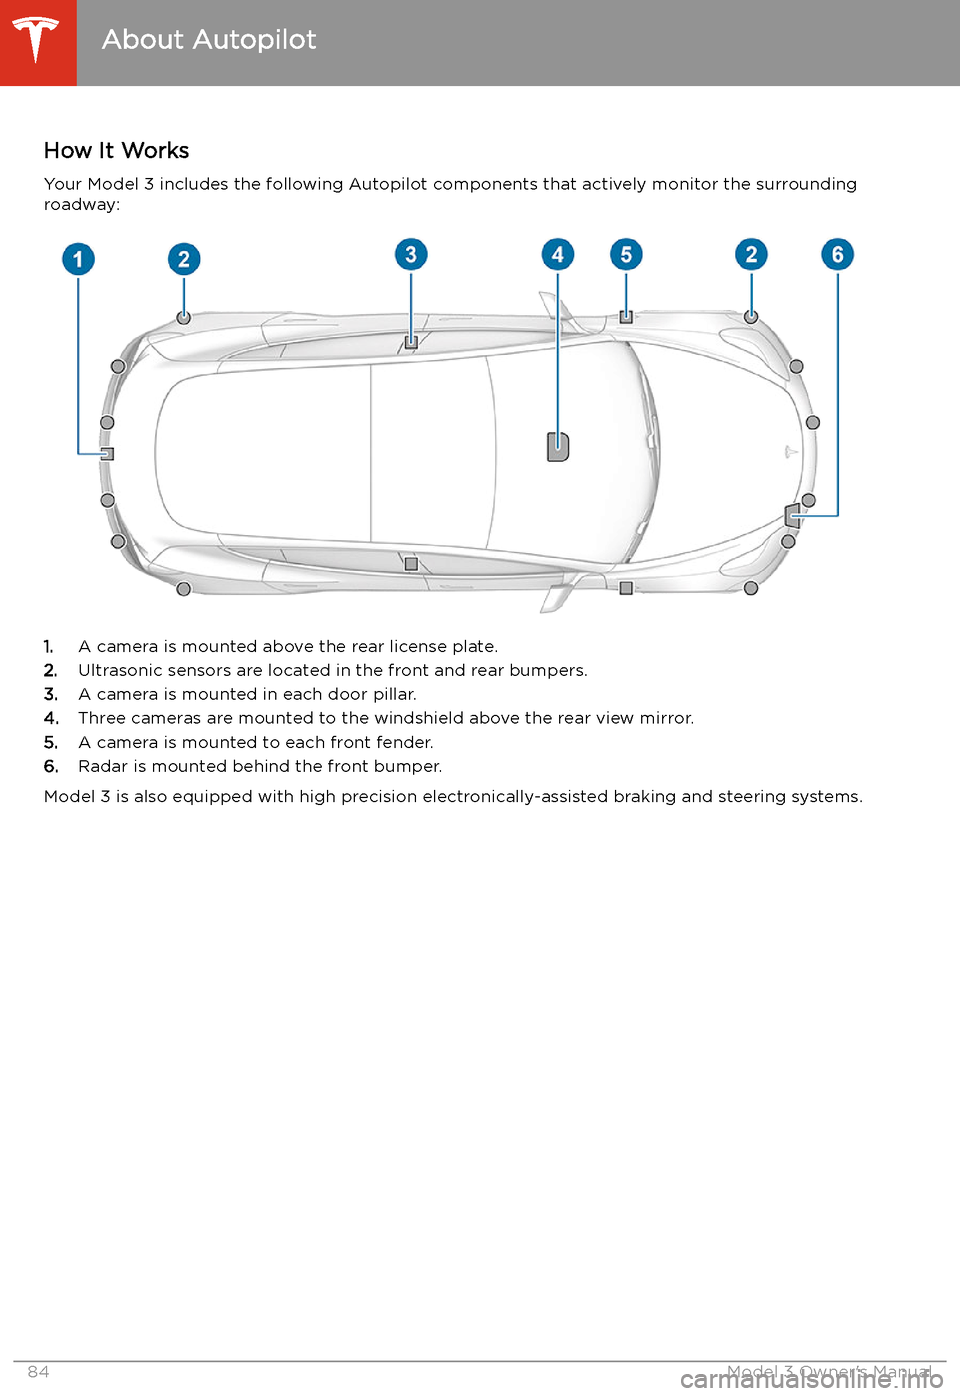 TESLA MODEL 3 2020  s Manual Online Autopilot
About Autopilot
How It Works Your Model 3 includes the following Autopilot components that actively monitor the surrounding
roadway:
1. A camera is mounted above the rear license plate.
2. U